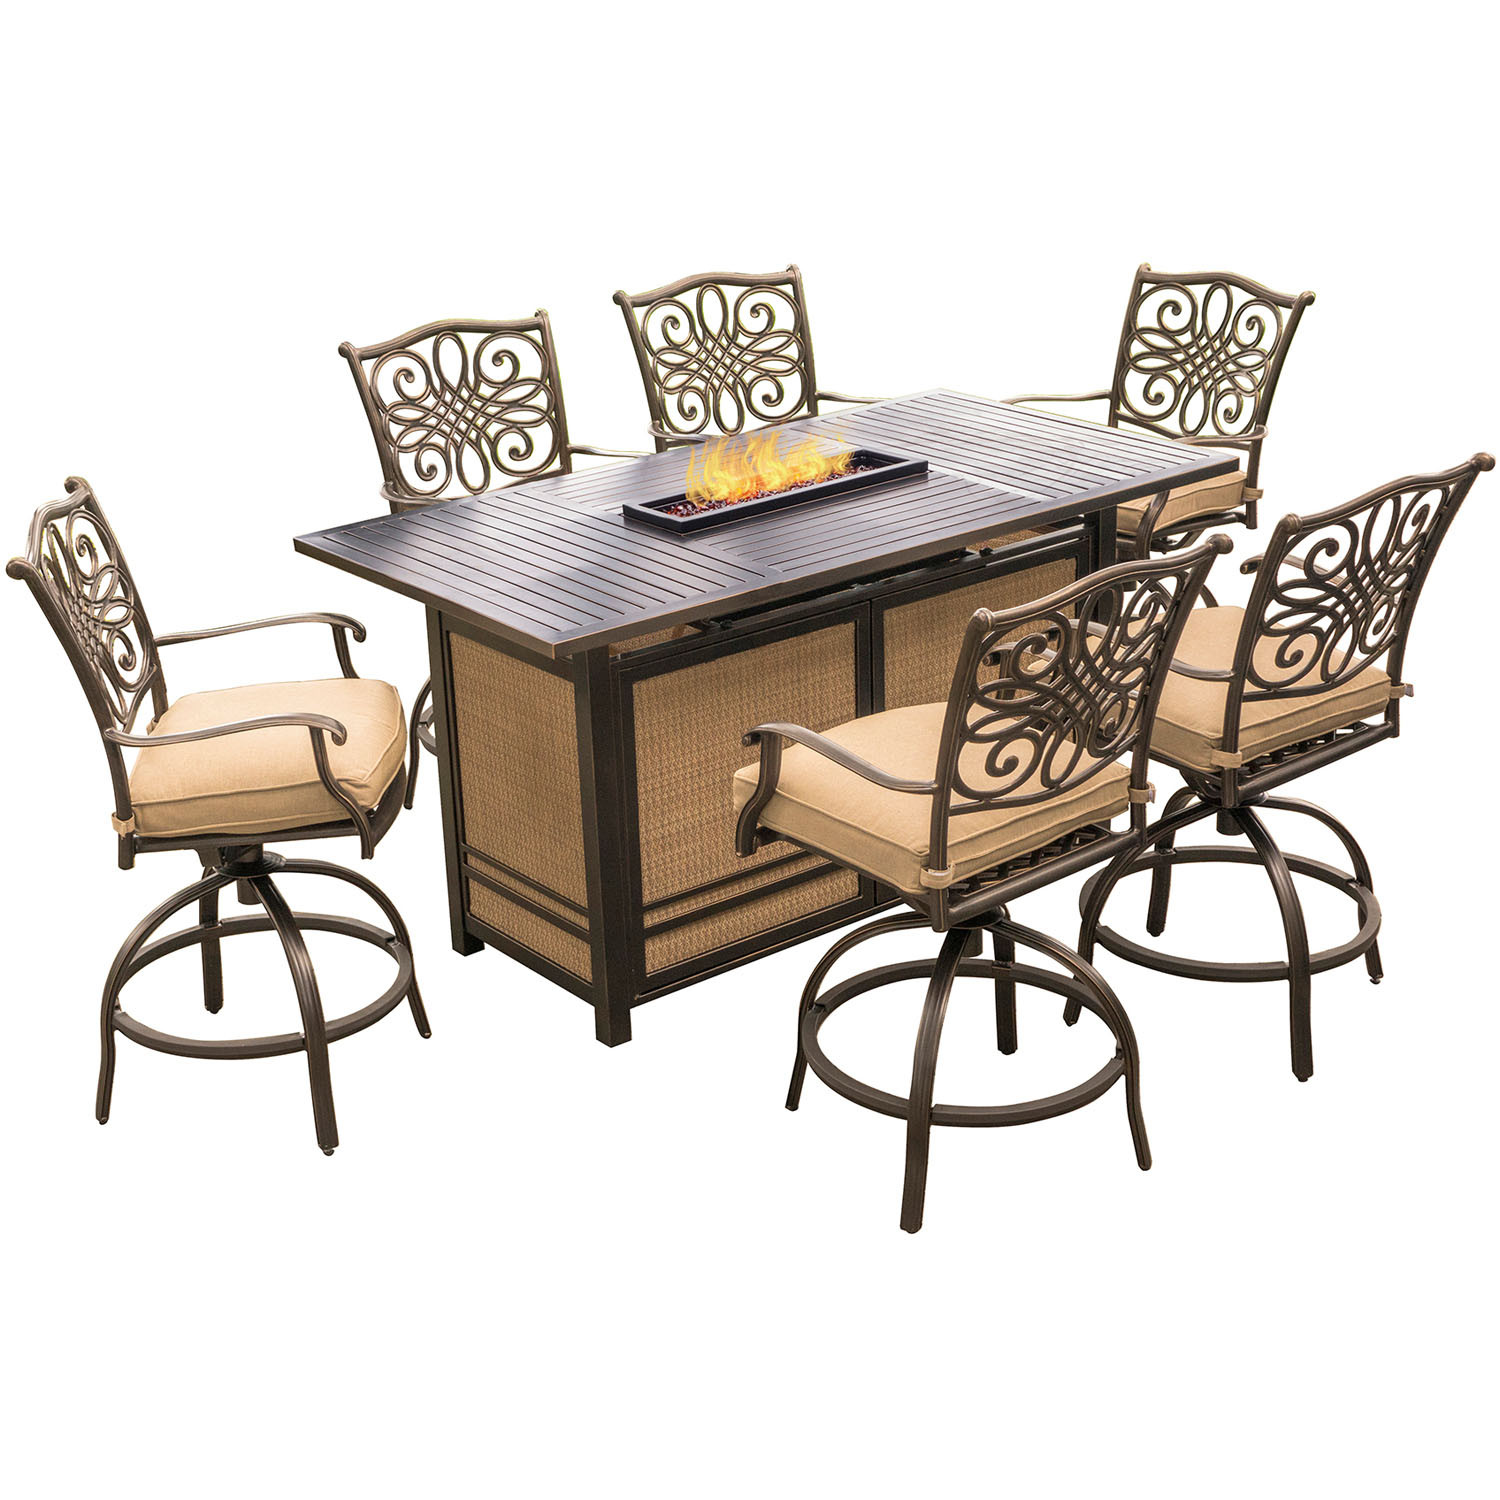 Fire Pit Dining Table
 Hanover Traditions 7 Piece High Dining Set in Tan with